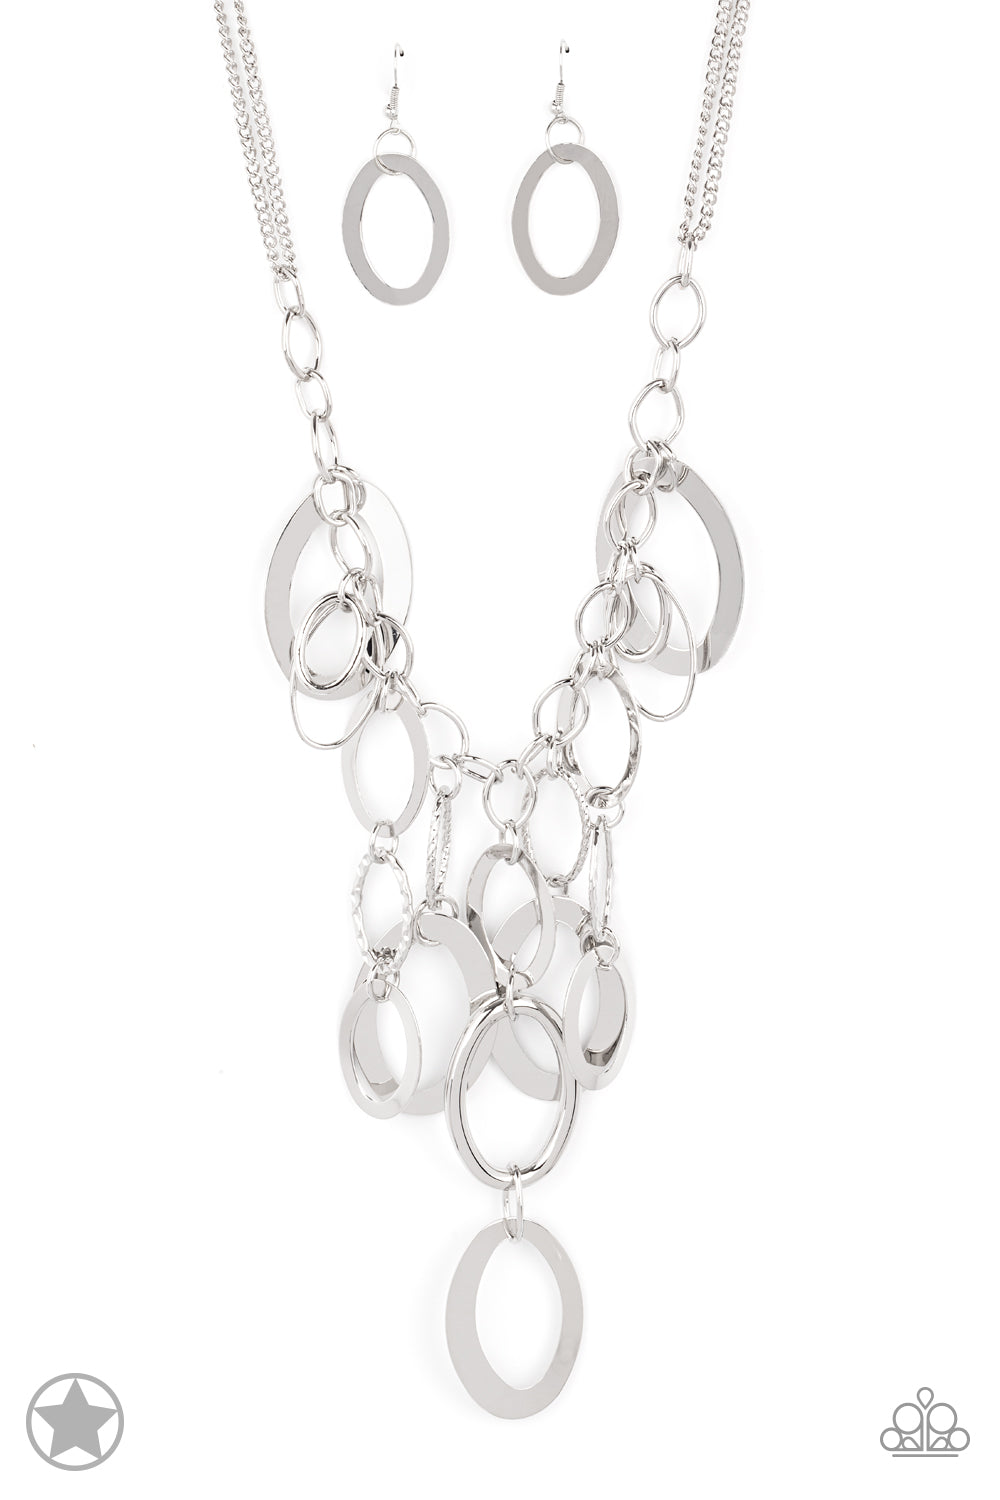 A Silver Spell Blockbuster Necklace - Paparazzi Accessories